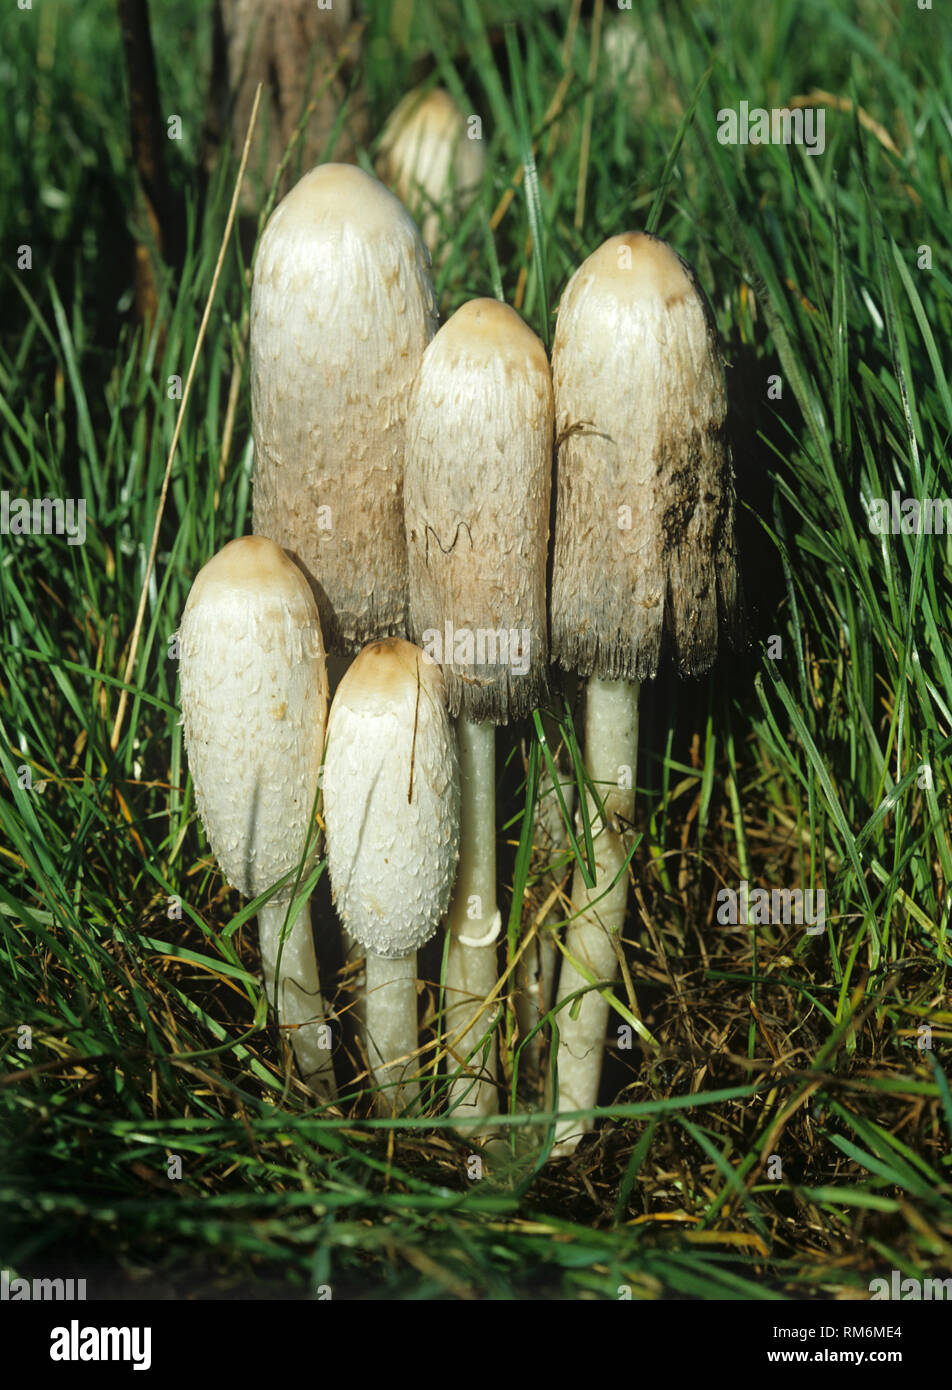 Lawyers wig & shaggy ink cap (Coprinus comatus) fruiting caps in grassland Stock Photo